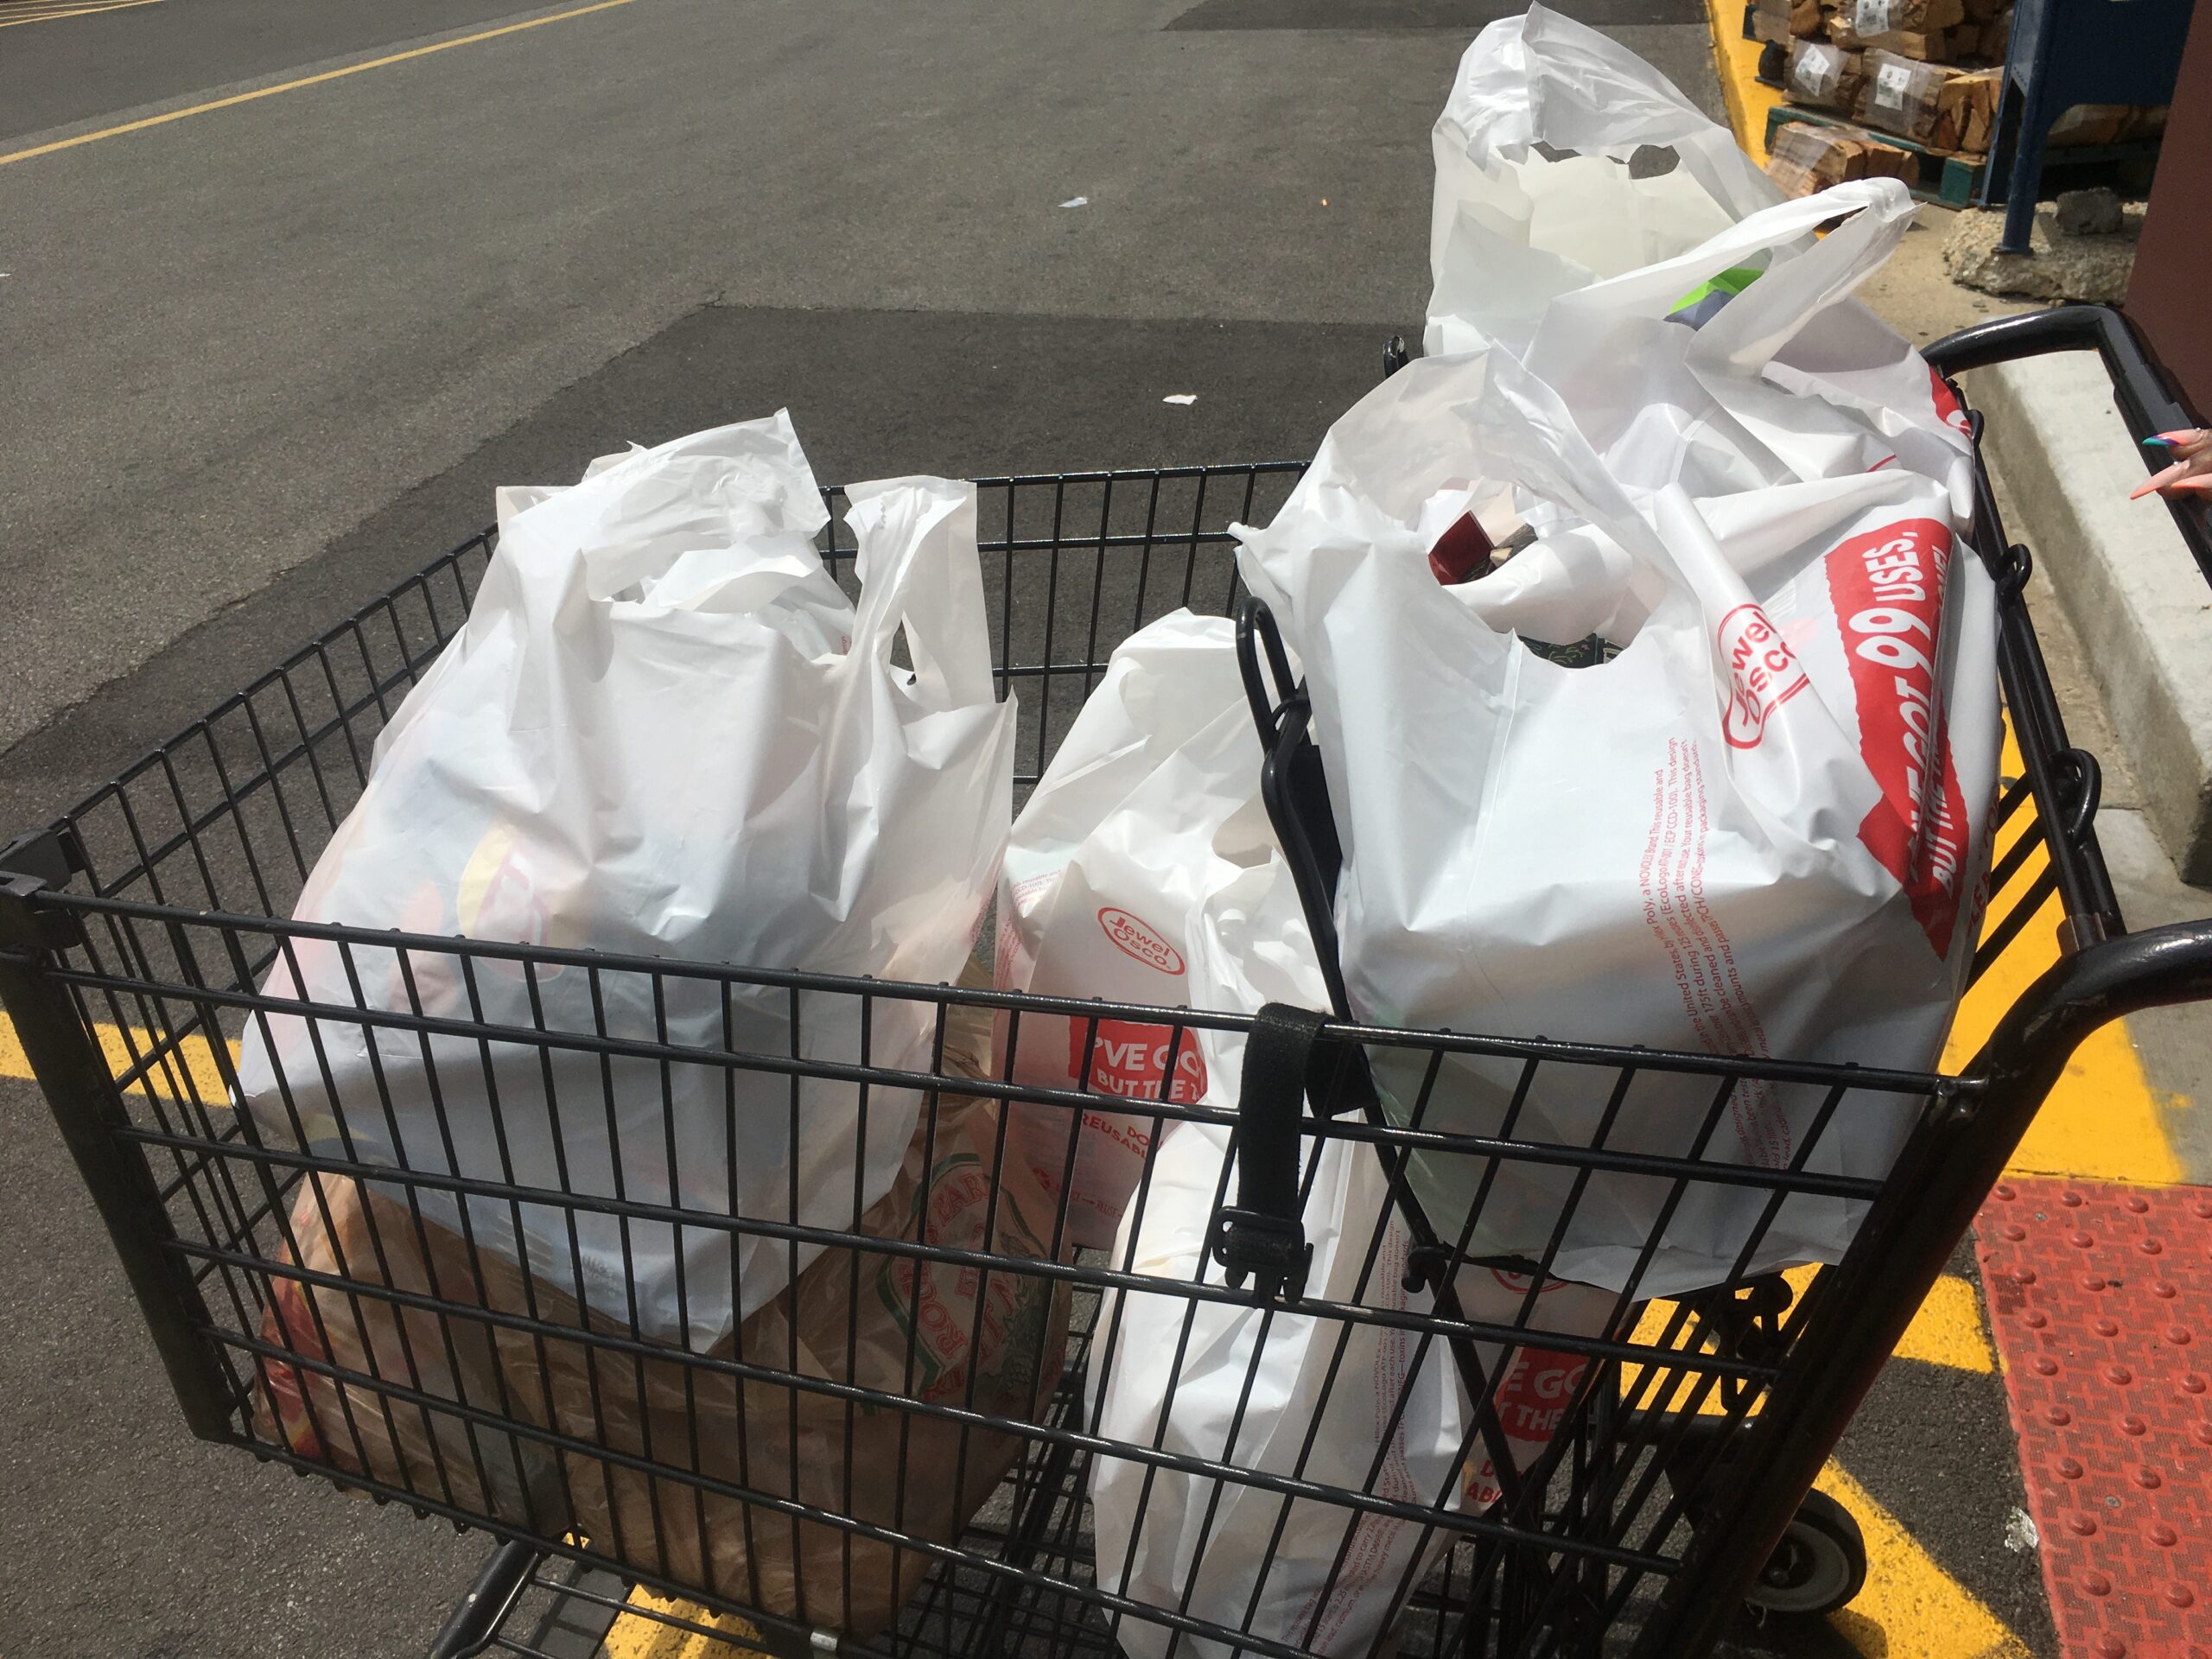 City plastic bag ban now in effect